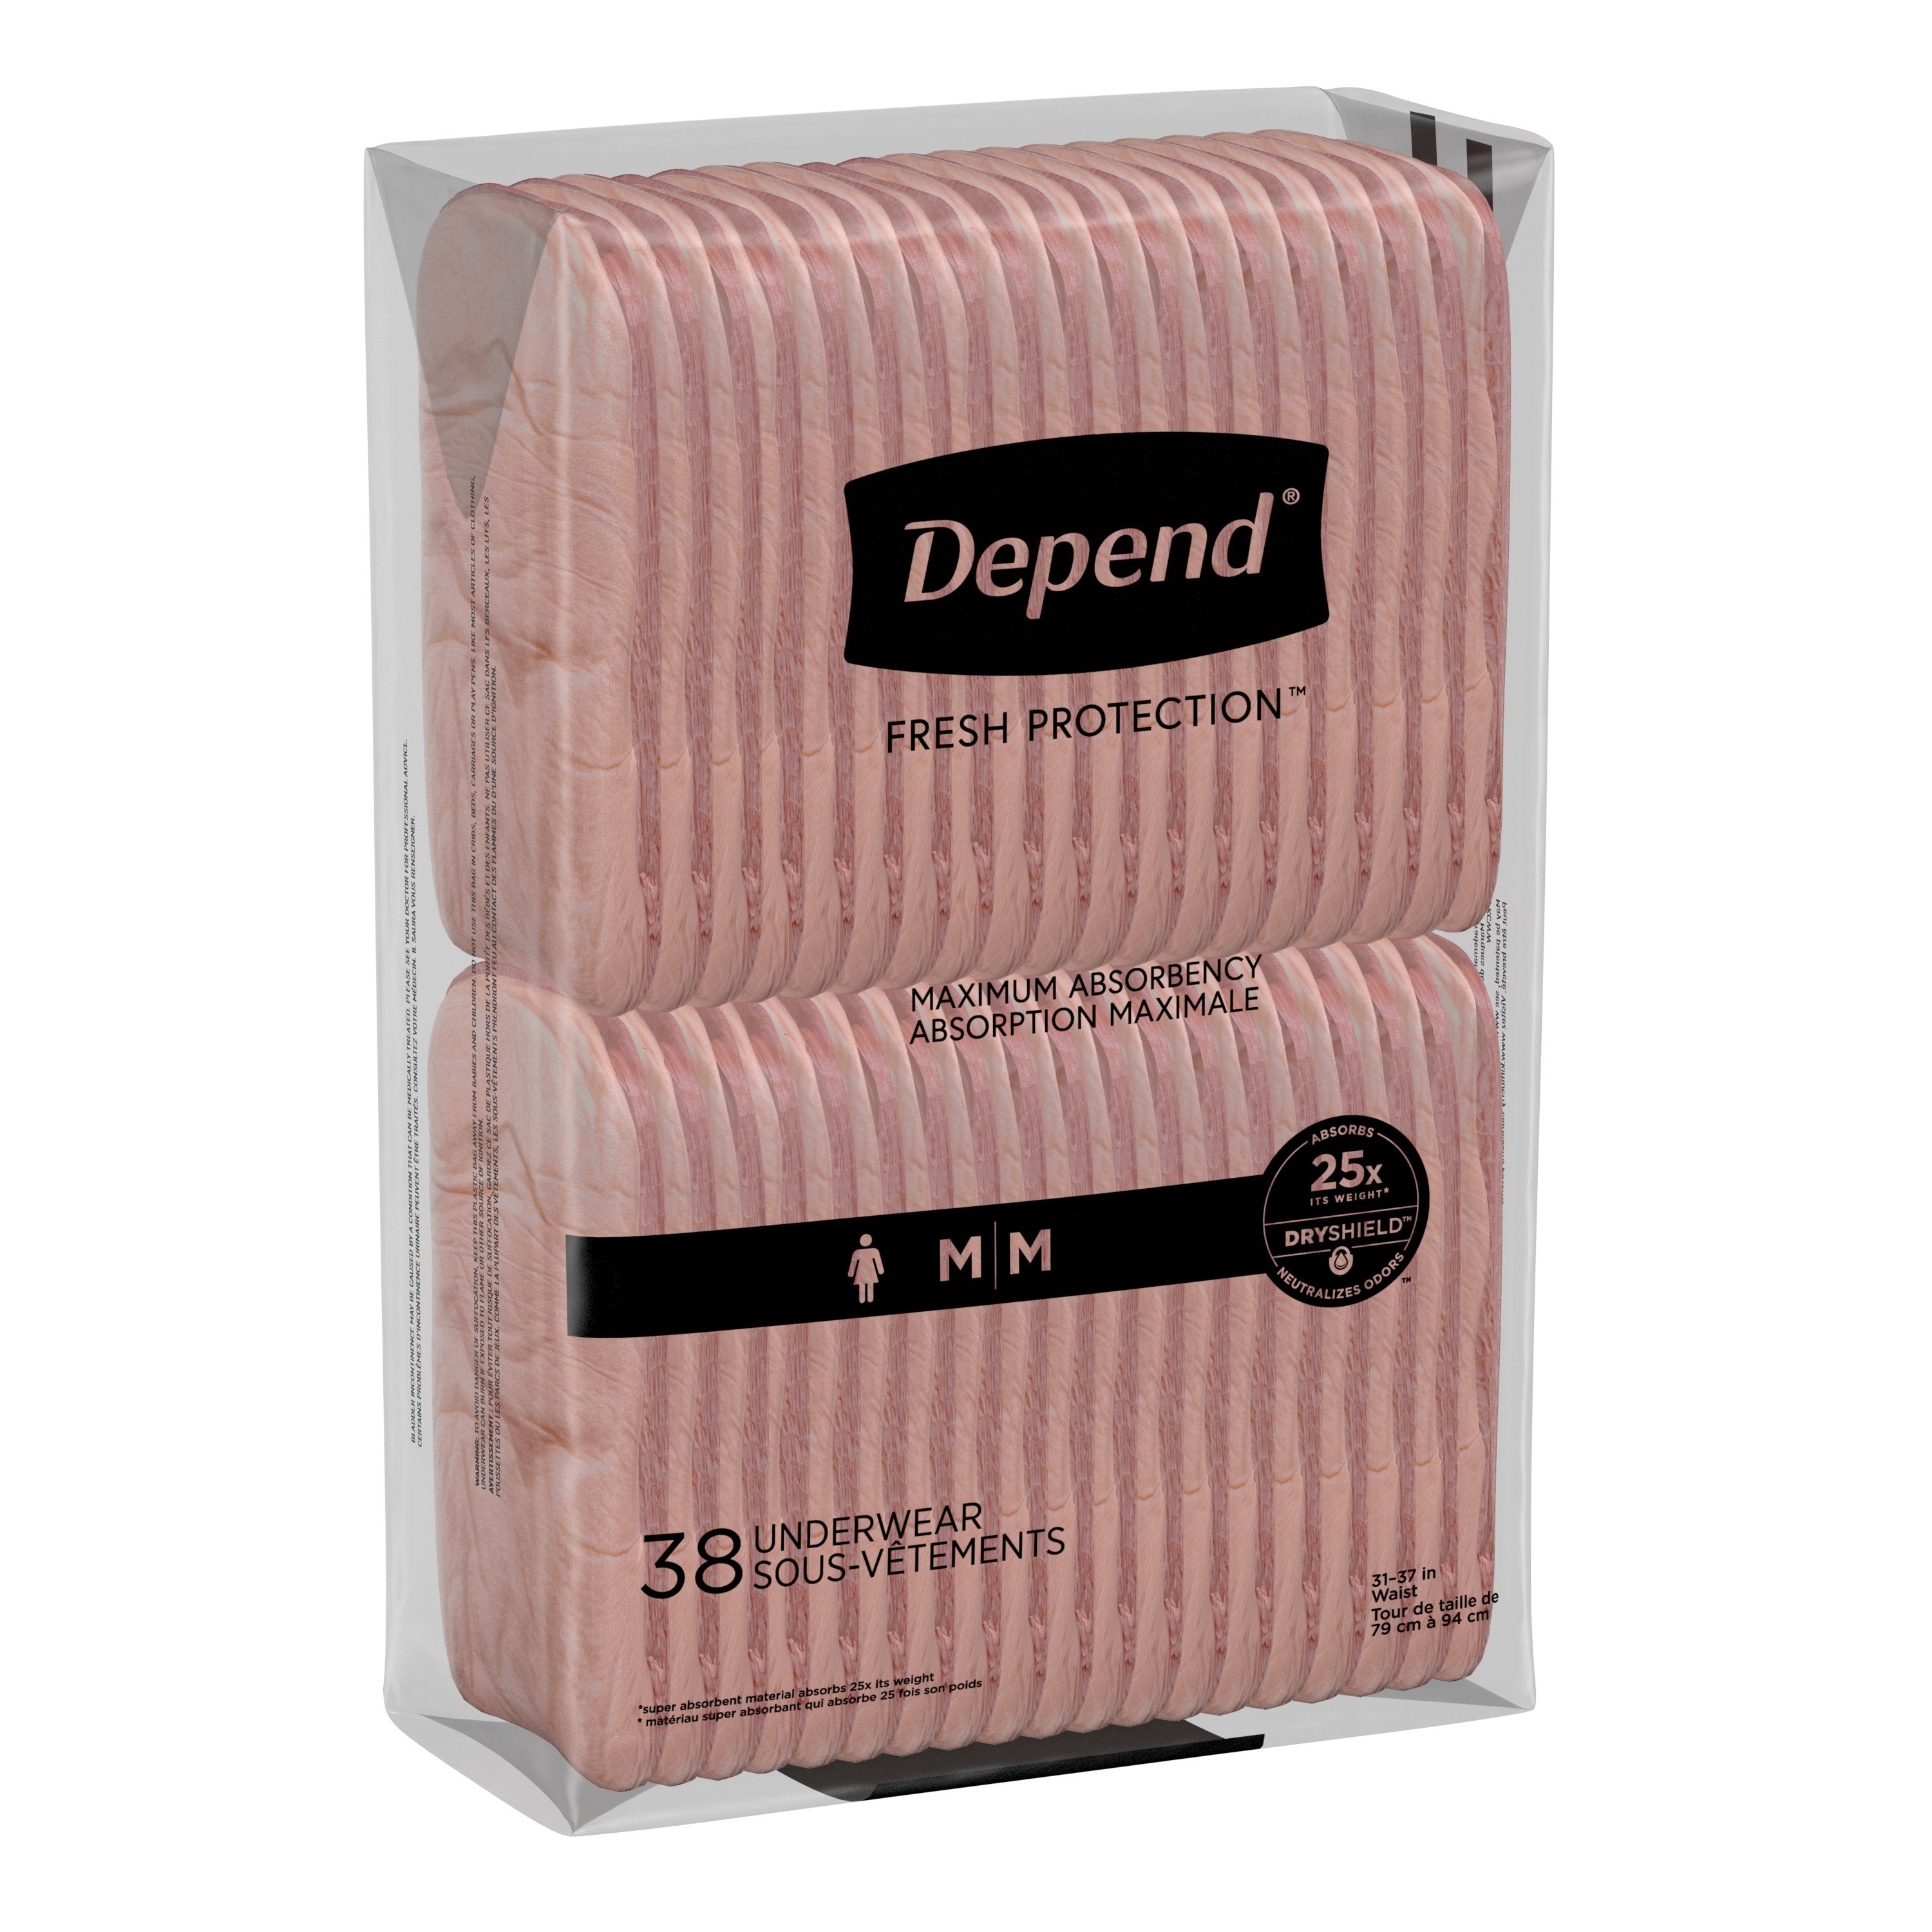 Depend Fresh Protection Underwear for Women - Value Pack